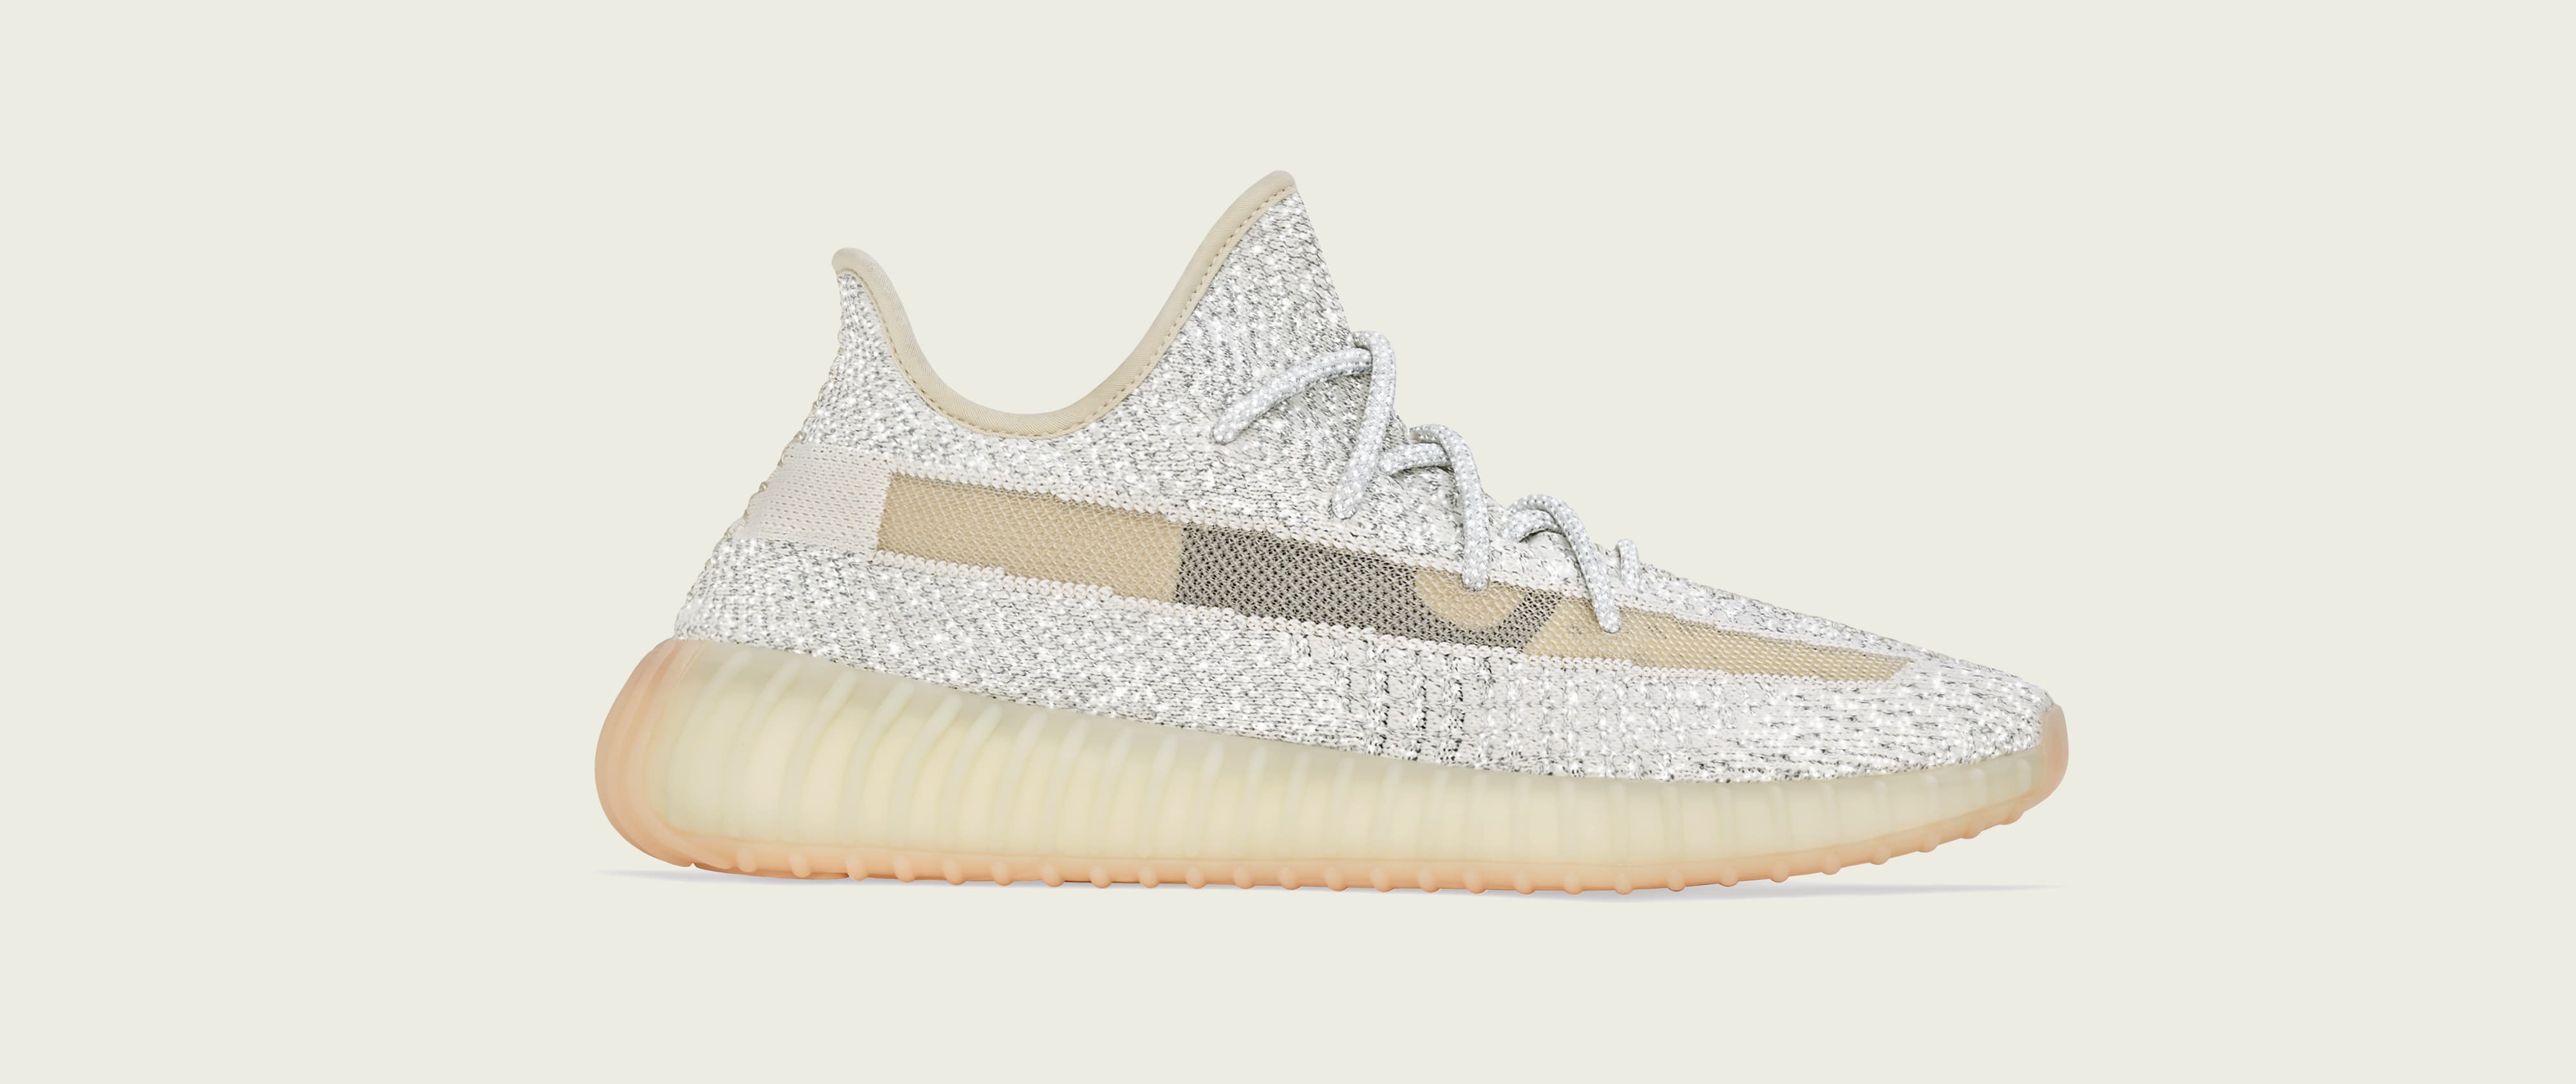 Adidas Yeezy Boost 350 V2 &#x27;Lundmark/Reflective&#x27; (Lateral)